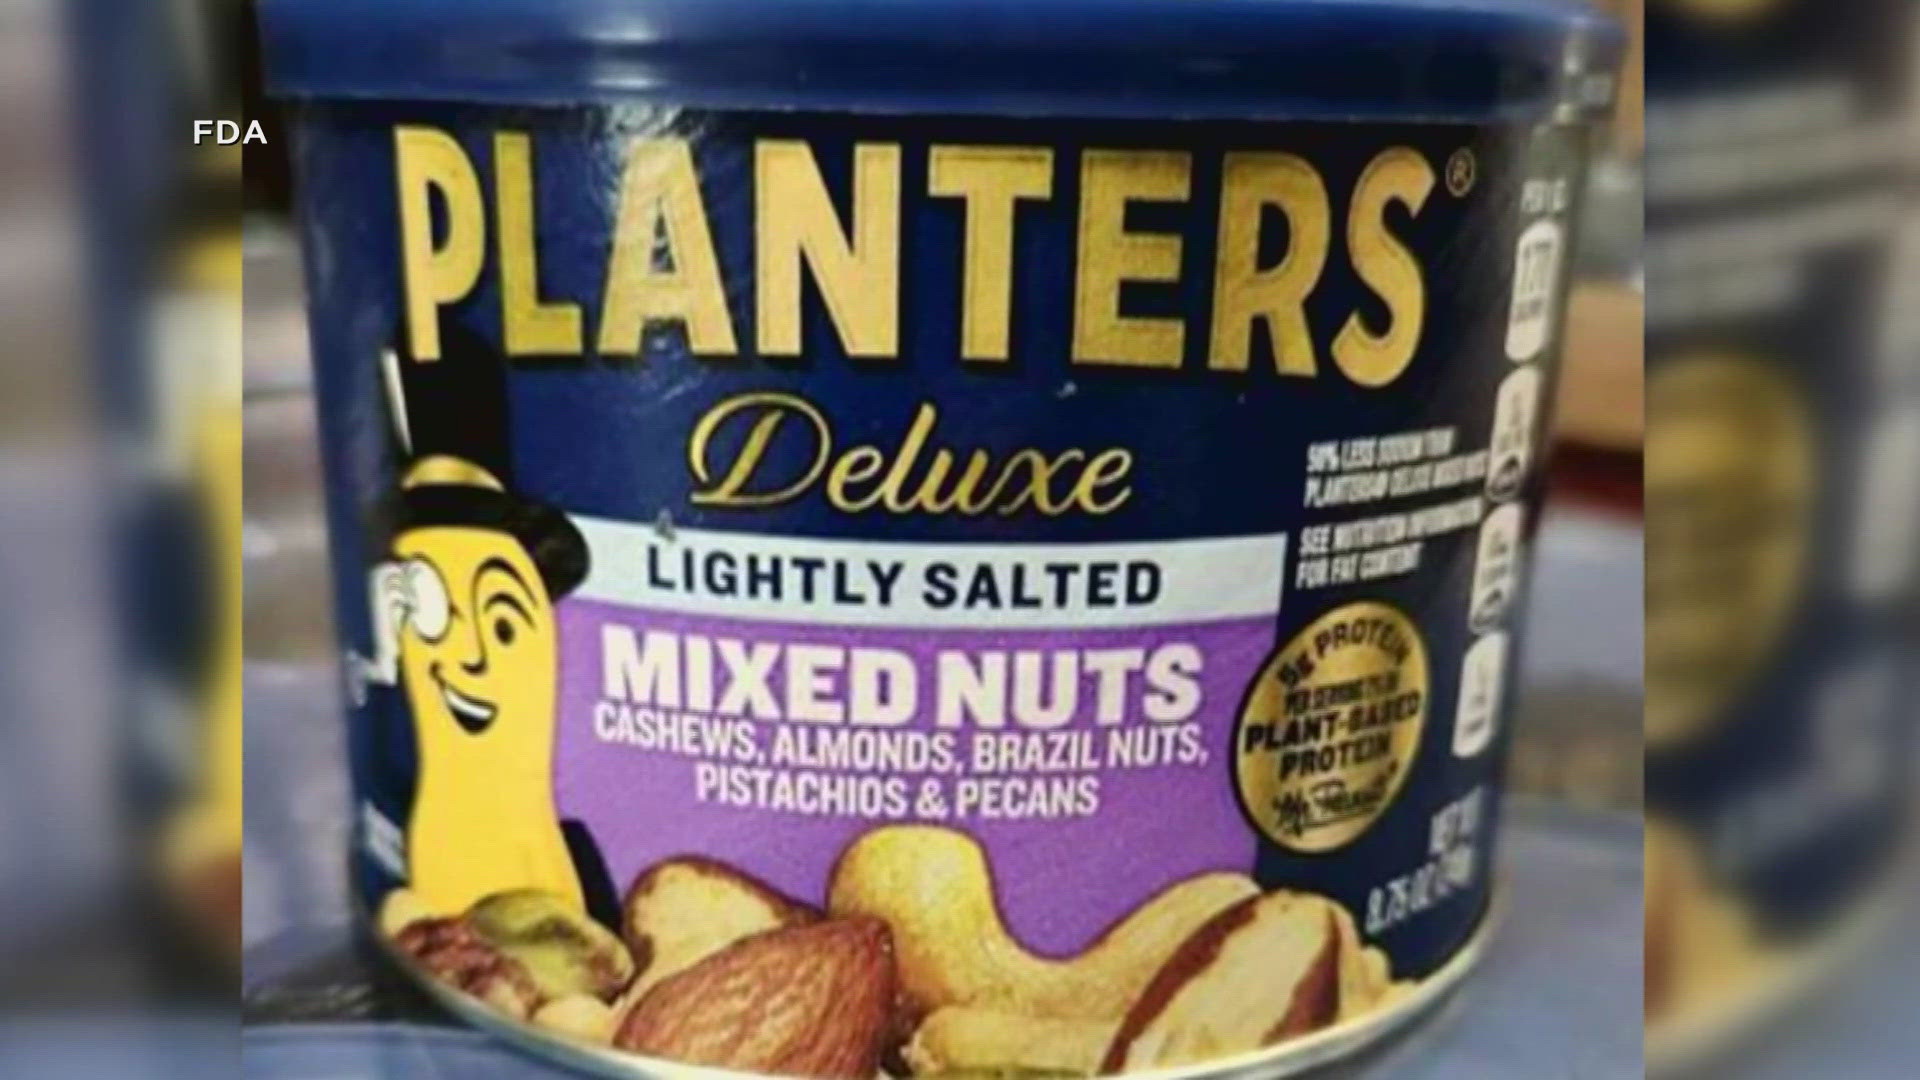 Some Planters' products are being recalled due to a possible Listeria contamination